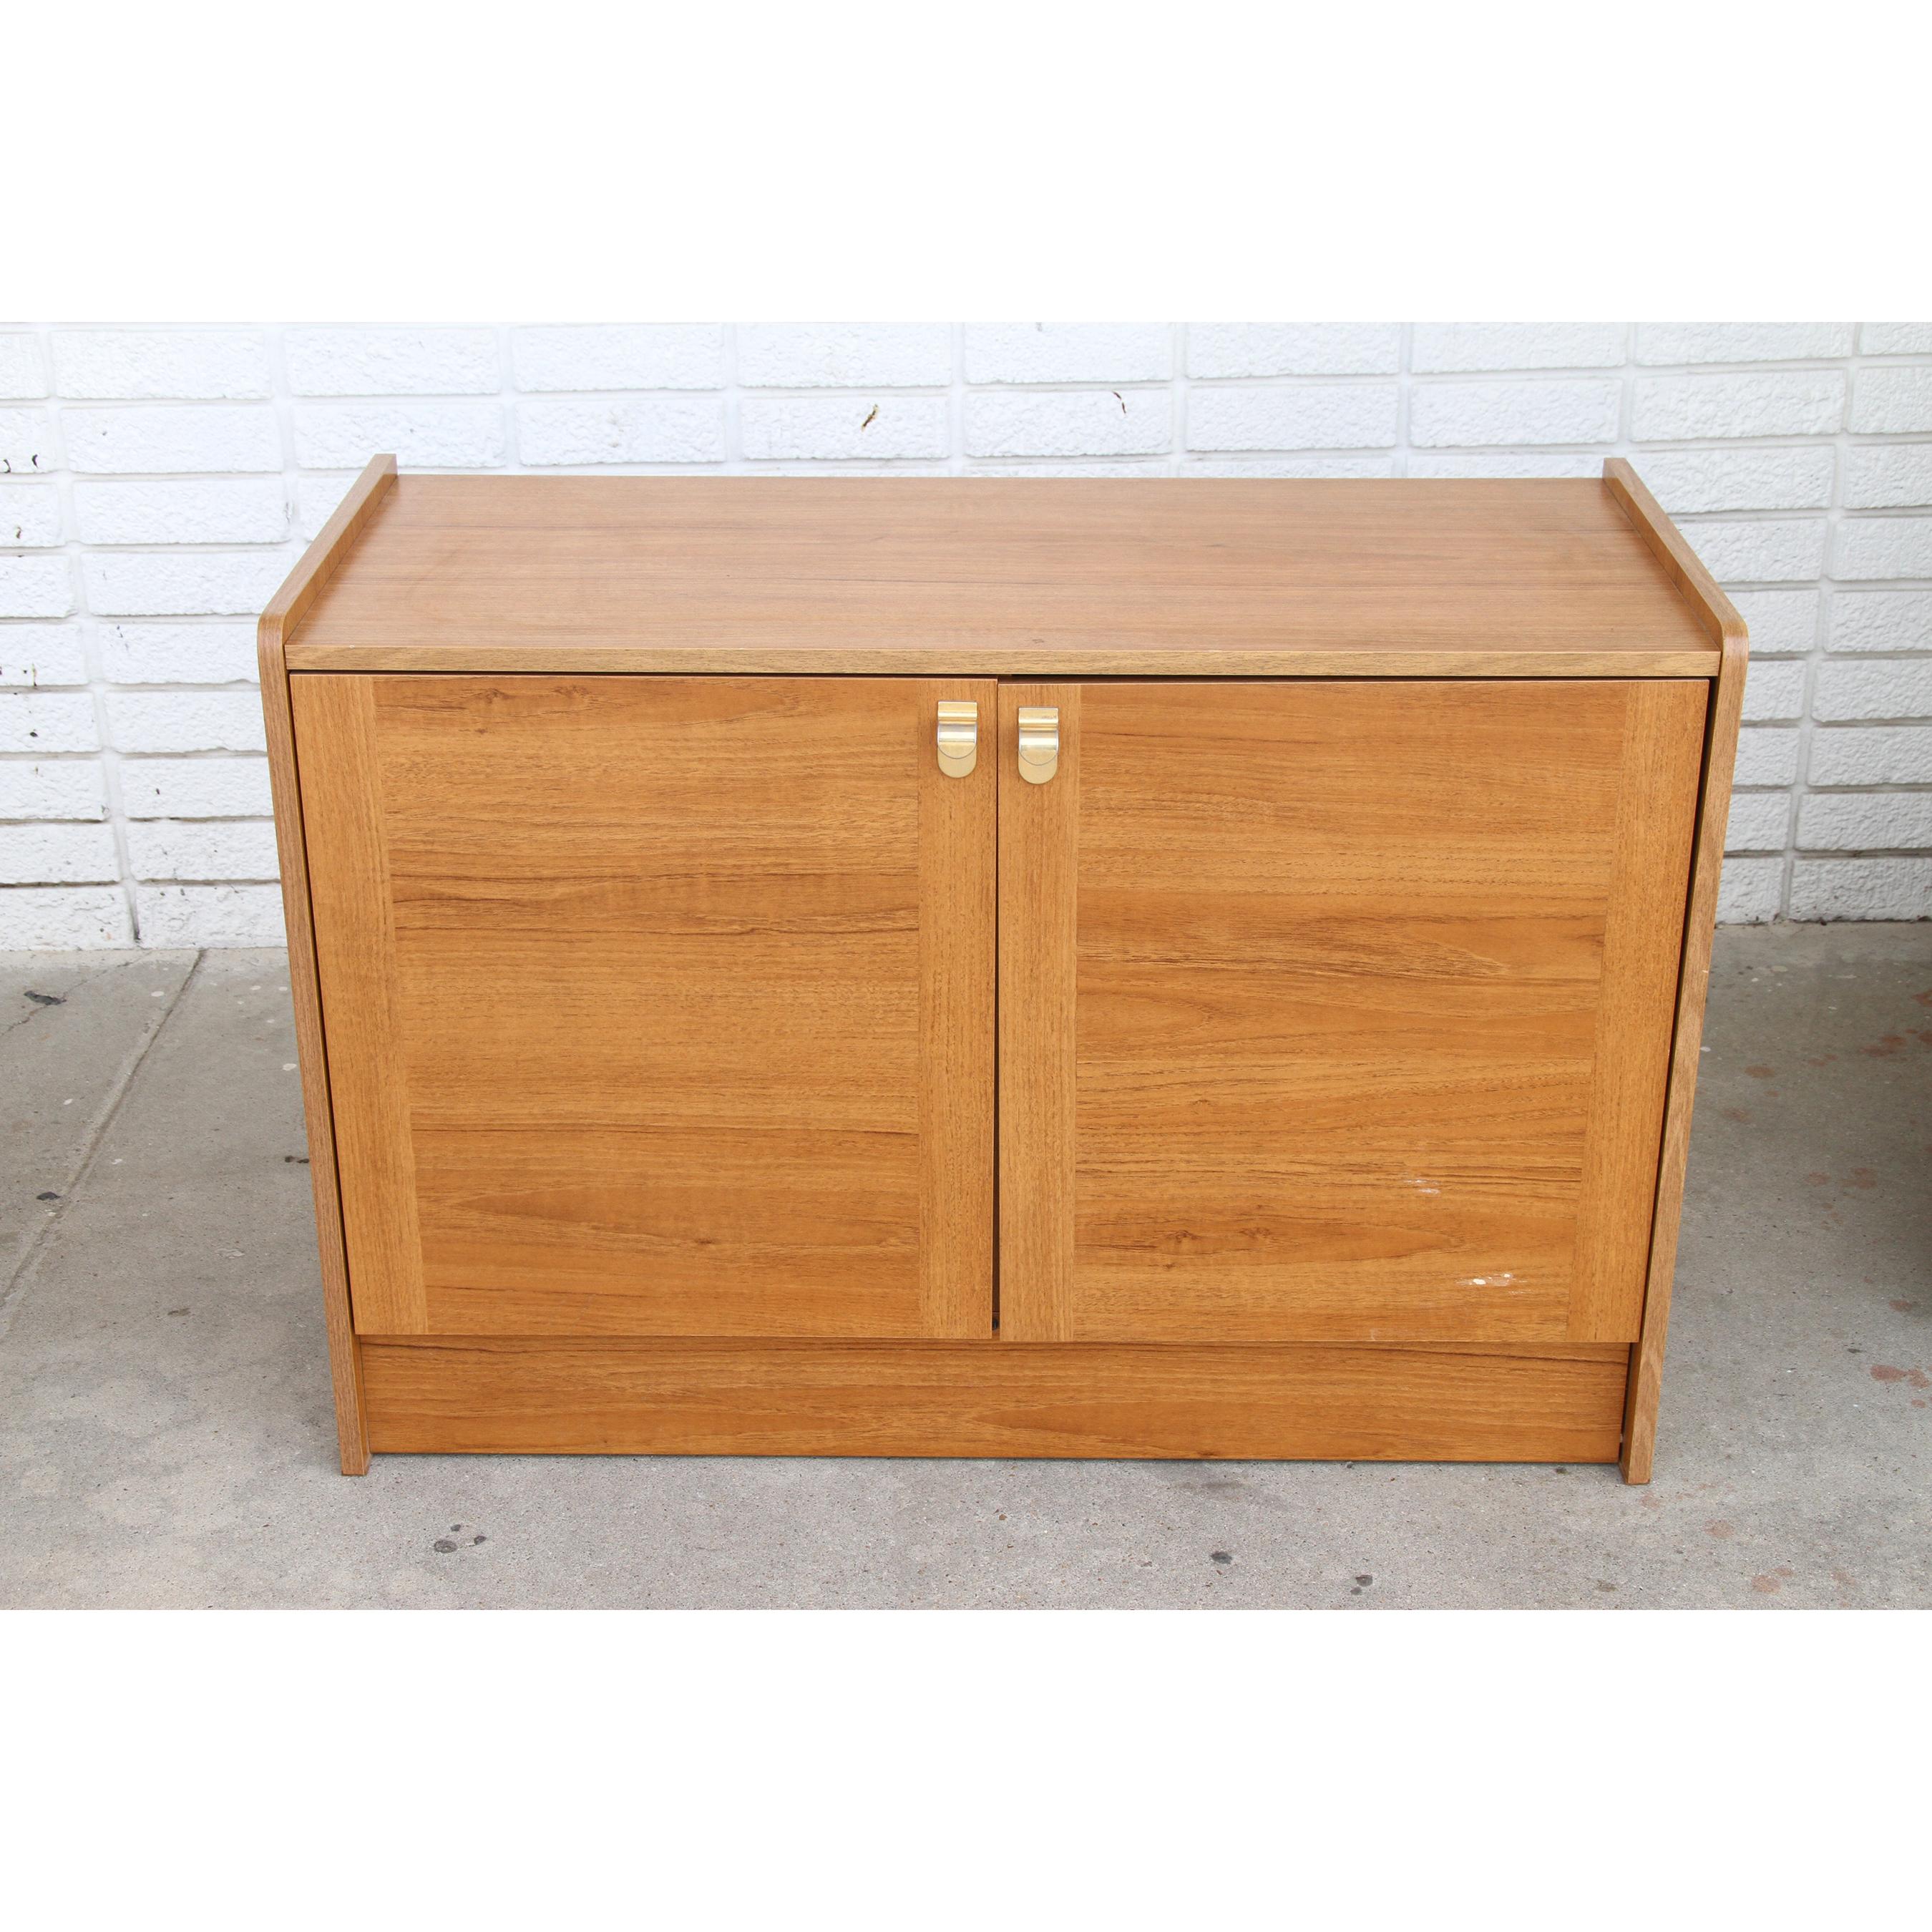 Danish Modern Teak Record Media credenza

Features a pull out shelf for cassettes, compartment for records, and shelving. Brass pulls. Circa mid to late 20th century. 
Measurements: overall: 25